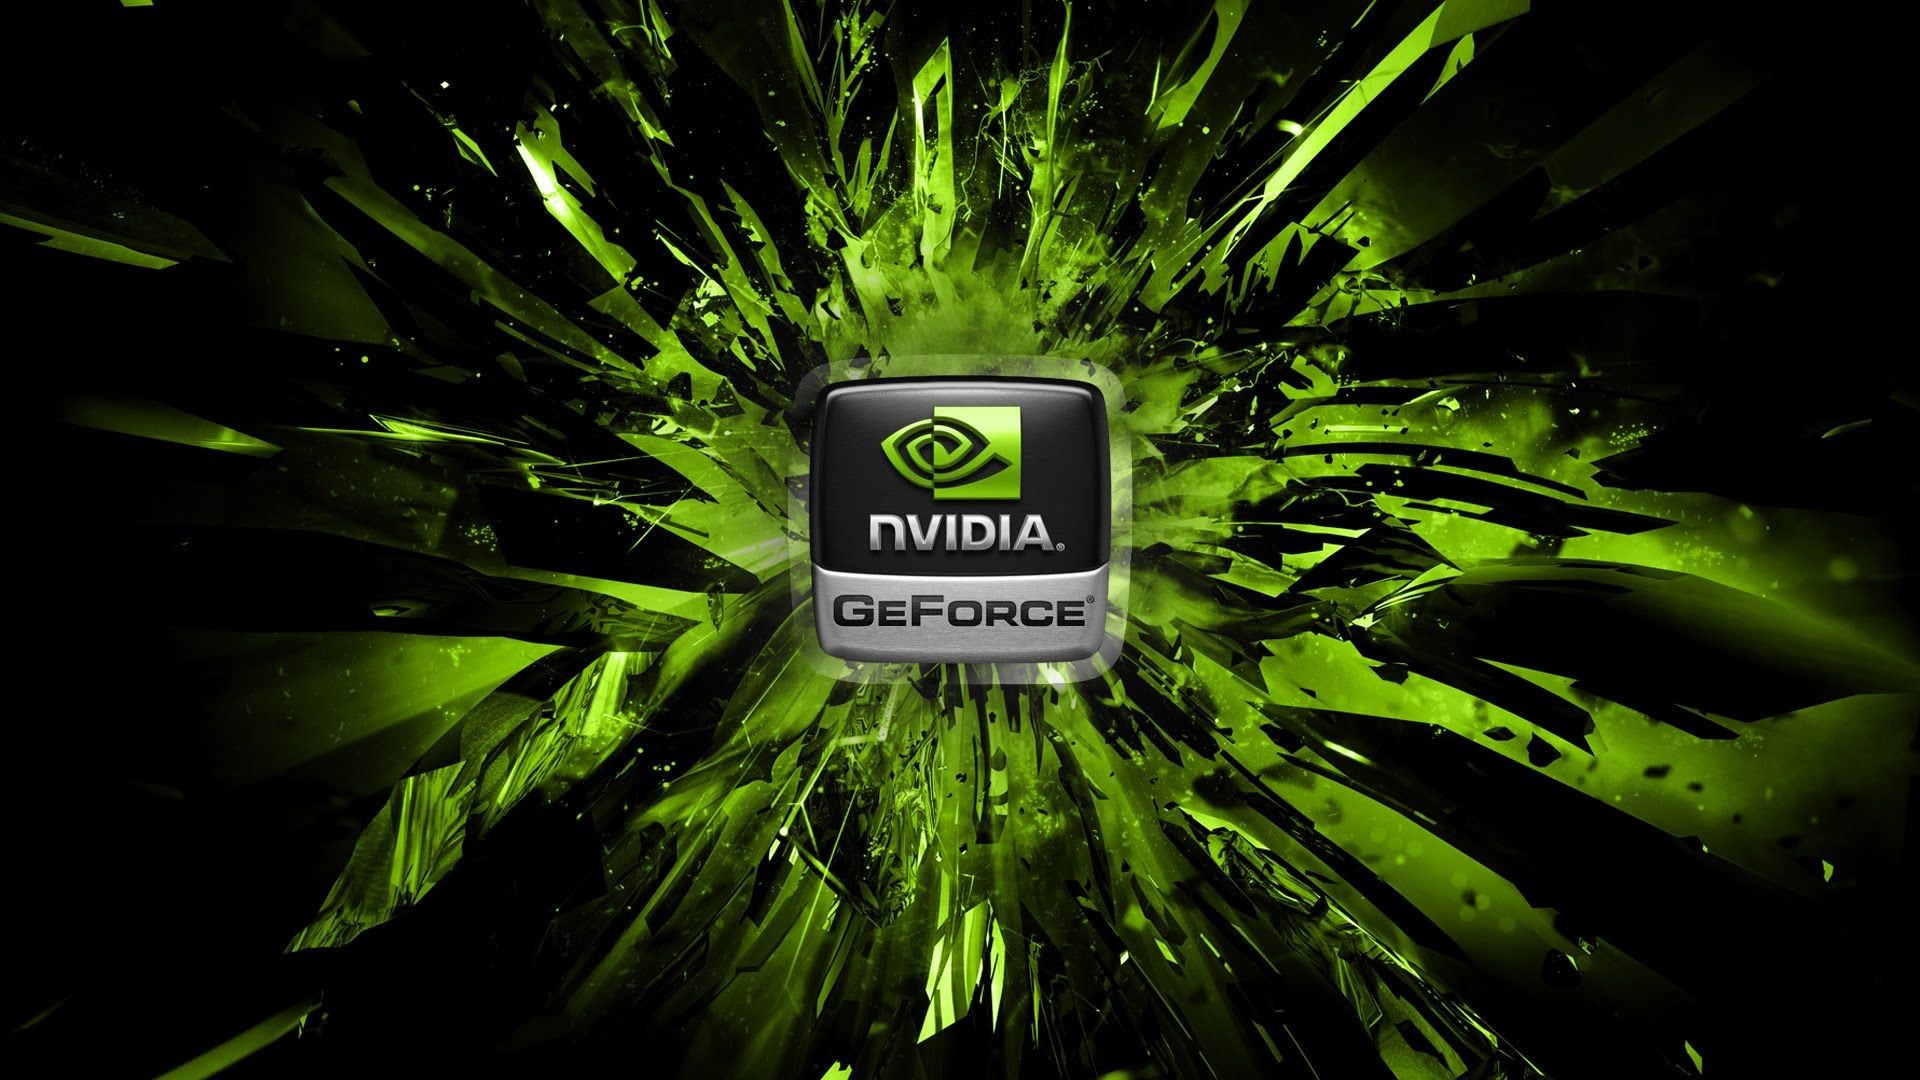 1920x1080 Nvidia's GTX 1080 and GTX 1070 revealed, Faster than Titan X at half the  price